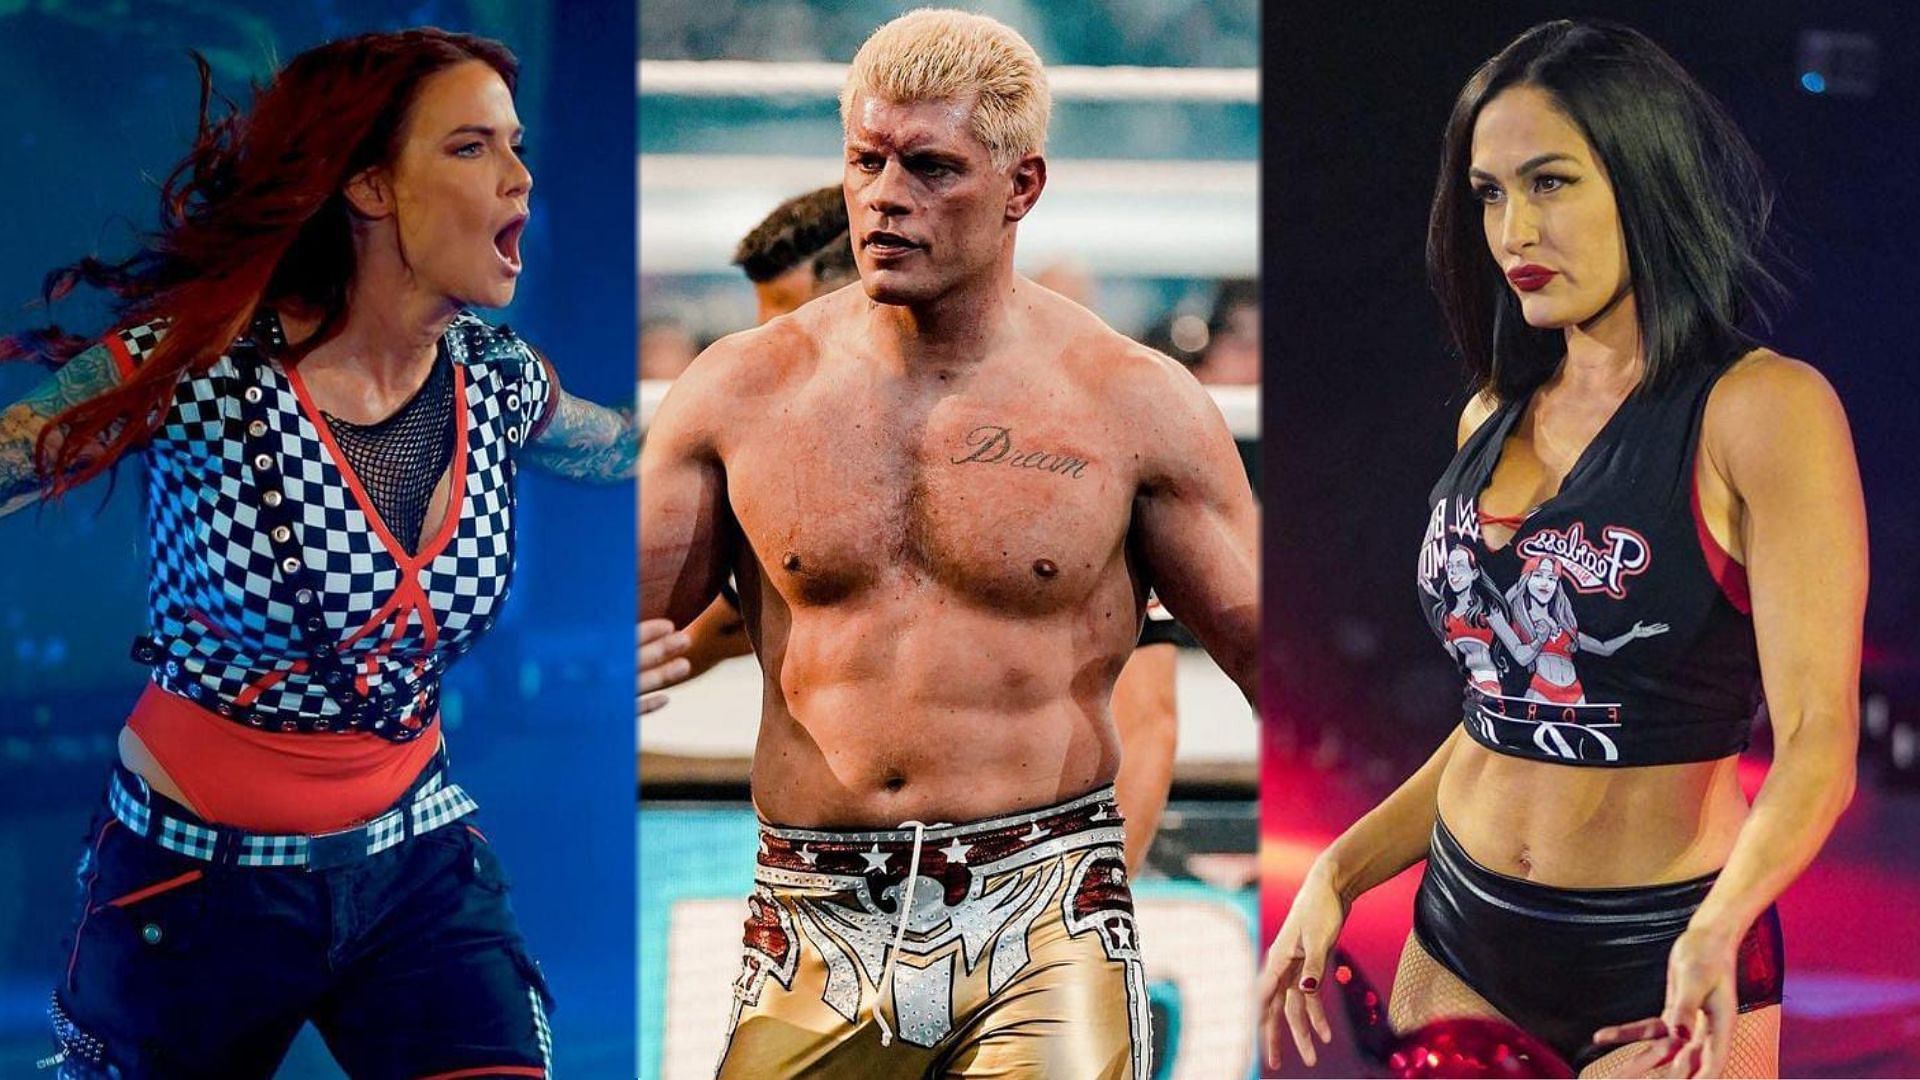 What did Lita, Cody Rhodes, and Nikki Bella have to do with AEW over the past week?